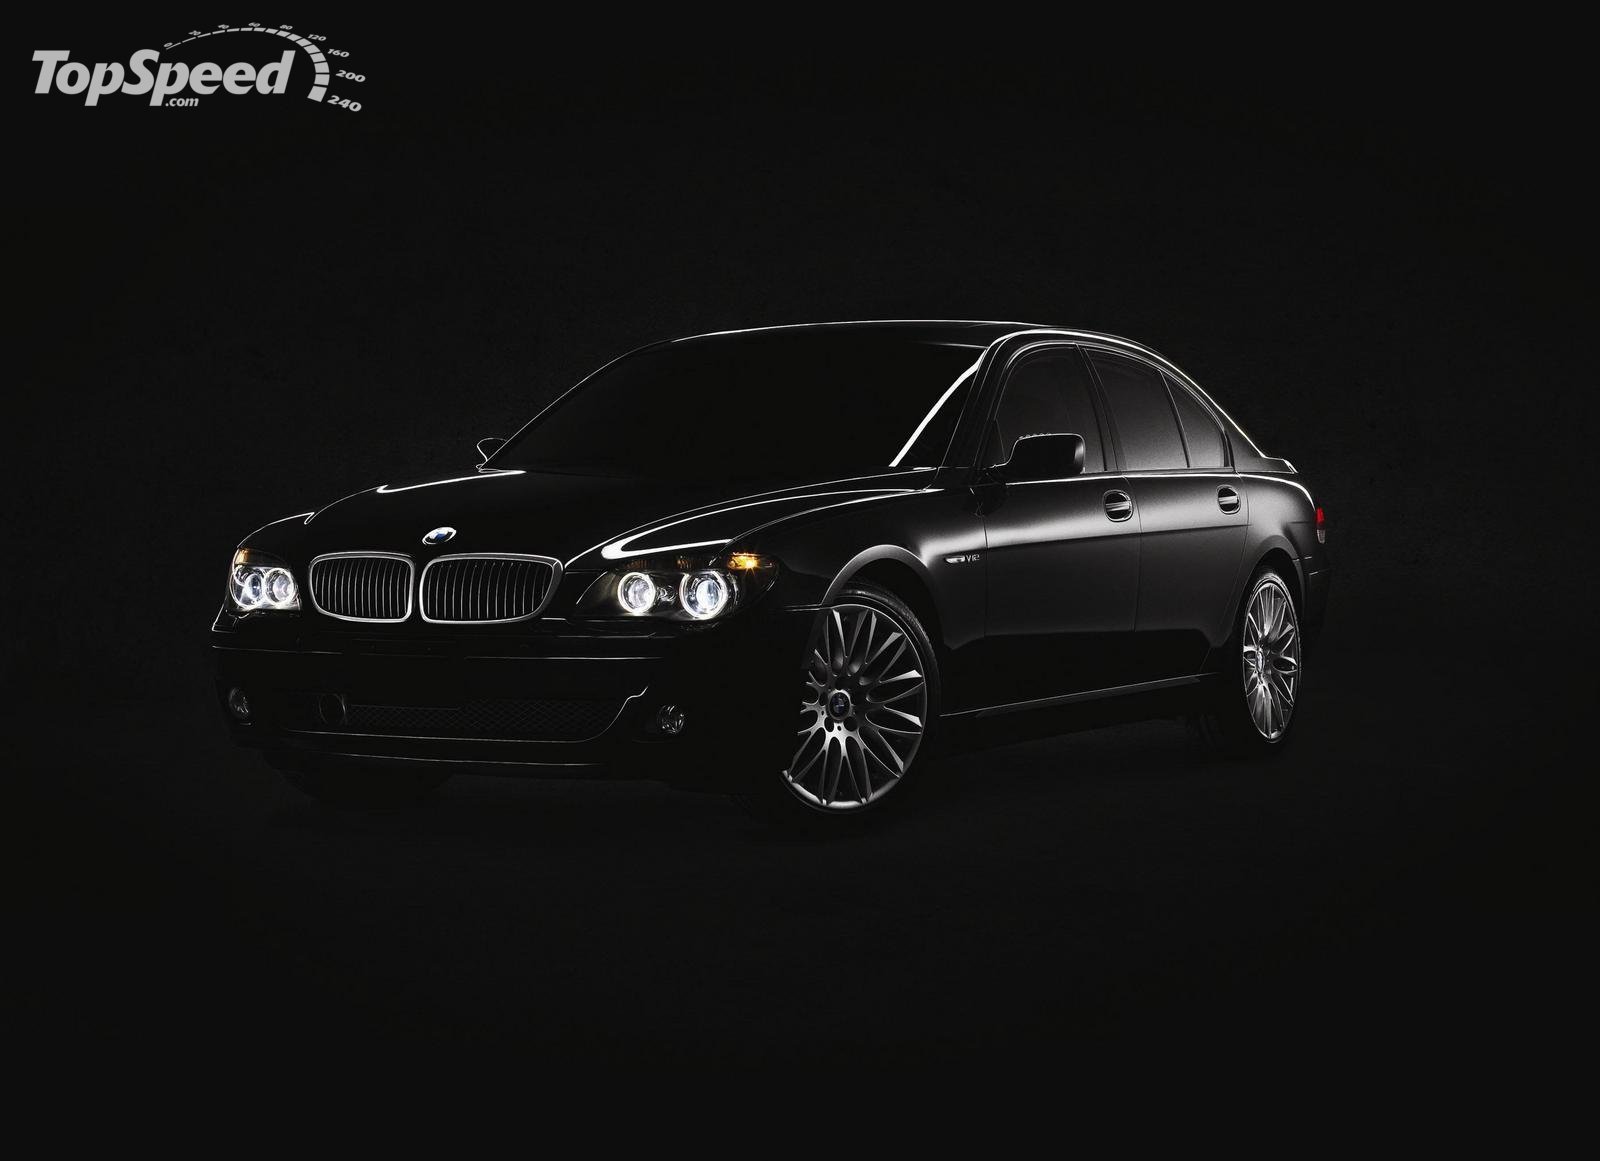 cool wallpapers: BMW 7 SERIES WALLPAPERS